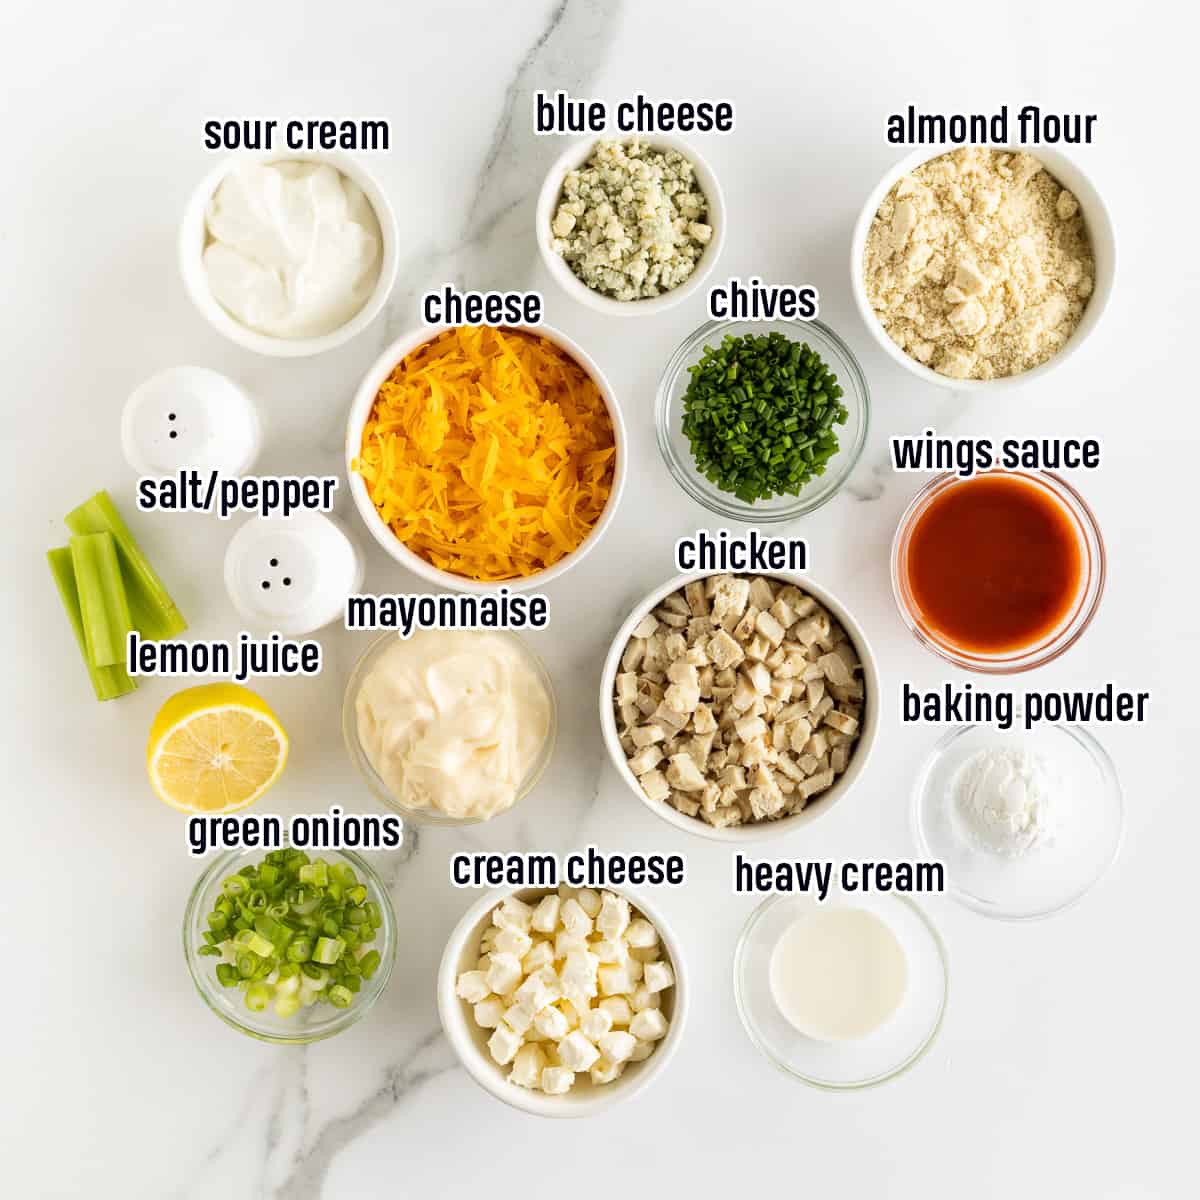 Sour cream, cream cheese, chicken, cheese and other ingredients in bowls with text.